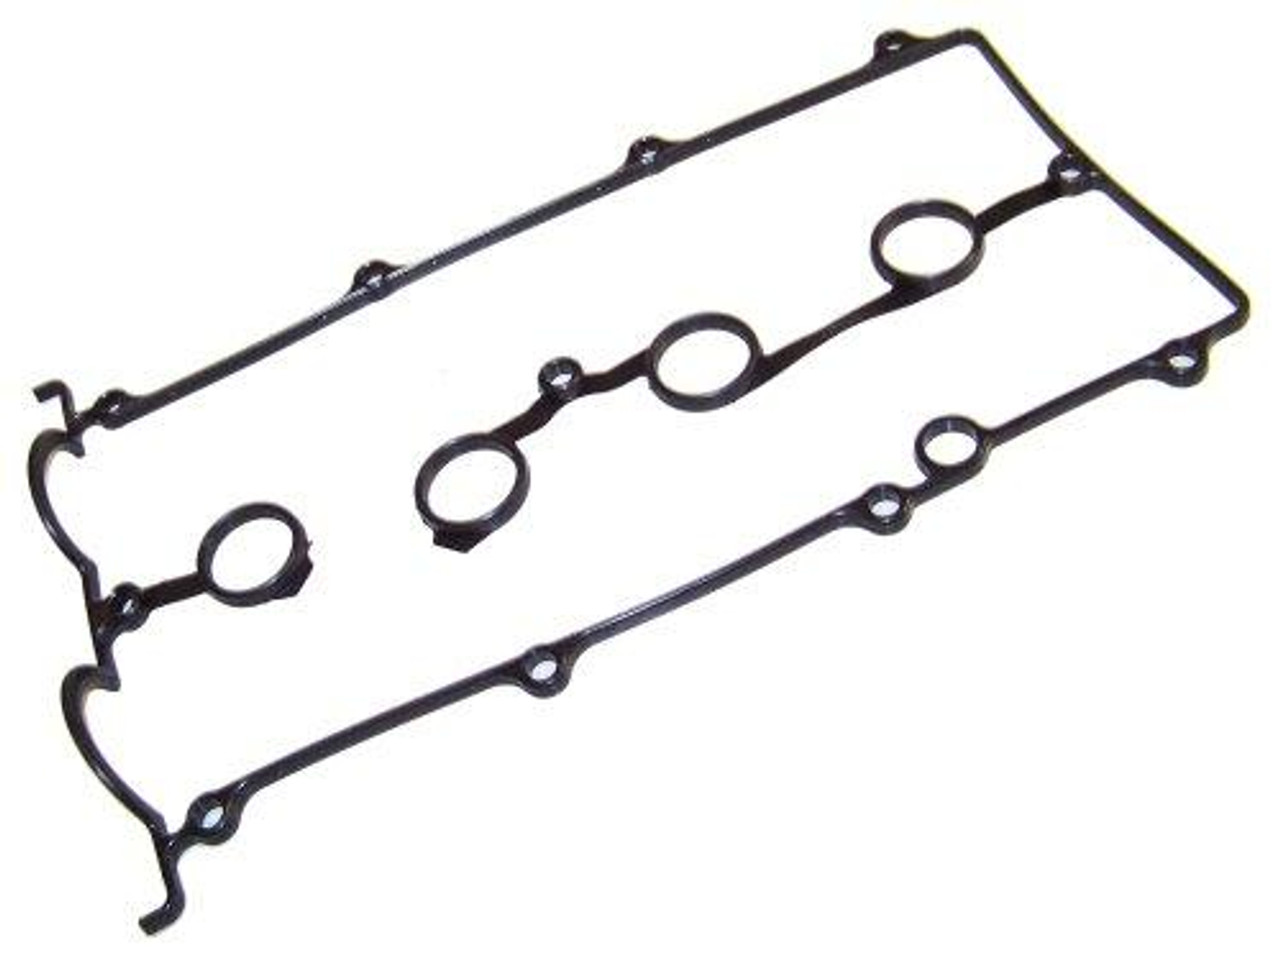 Valve Cover Gasket - 1995 Ford Probe 2.0L Engine Parts # VC425ZE3